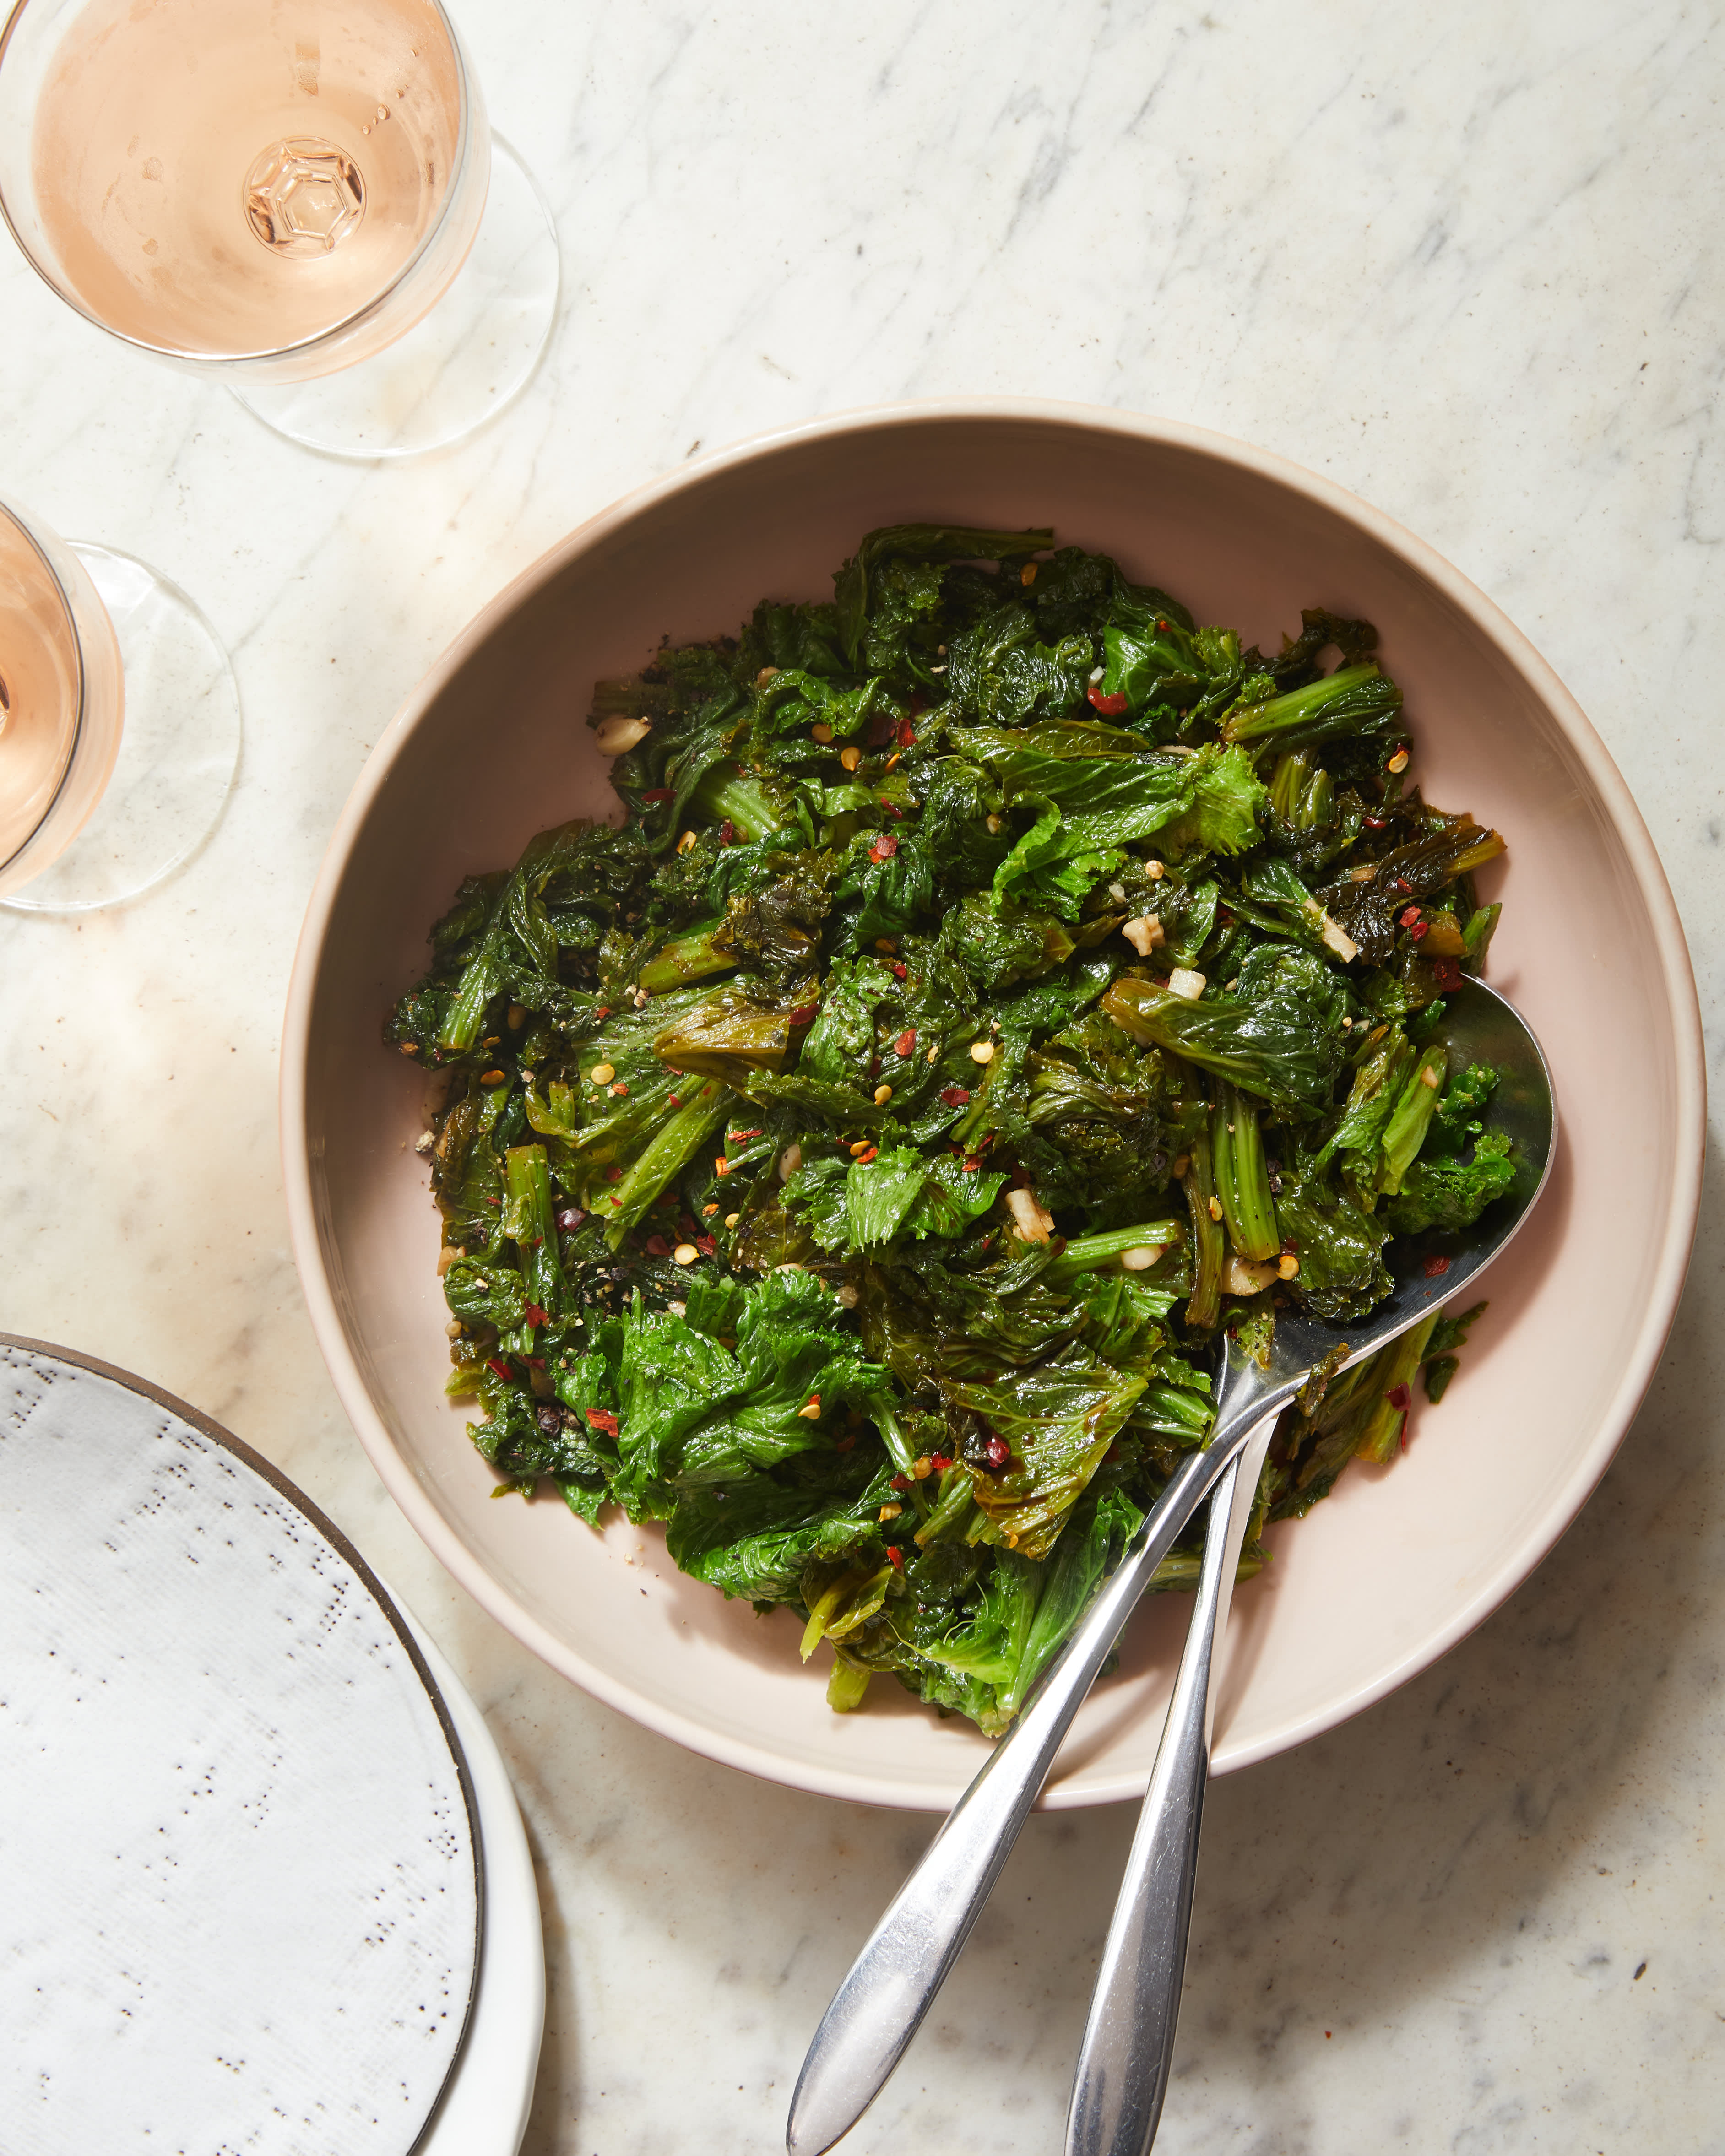 Mustard Greens Information and Facts